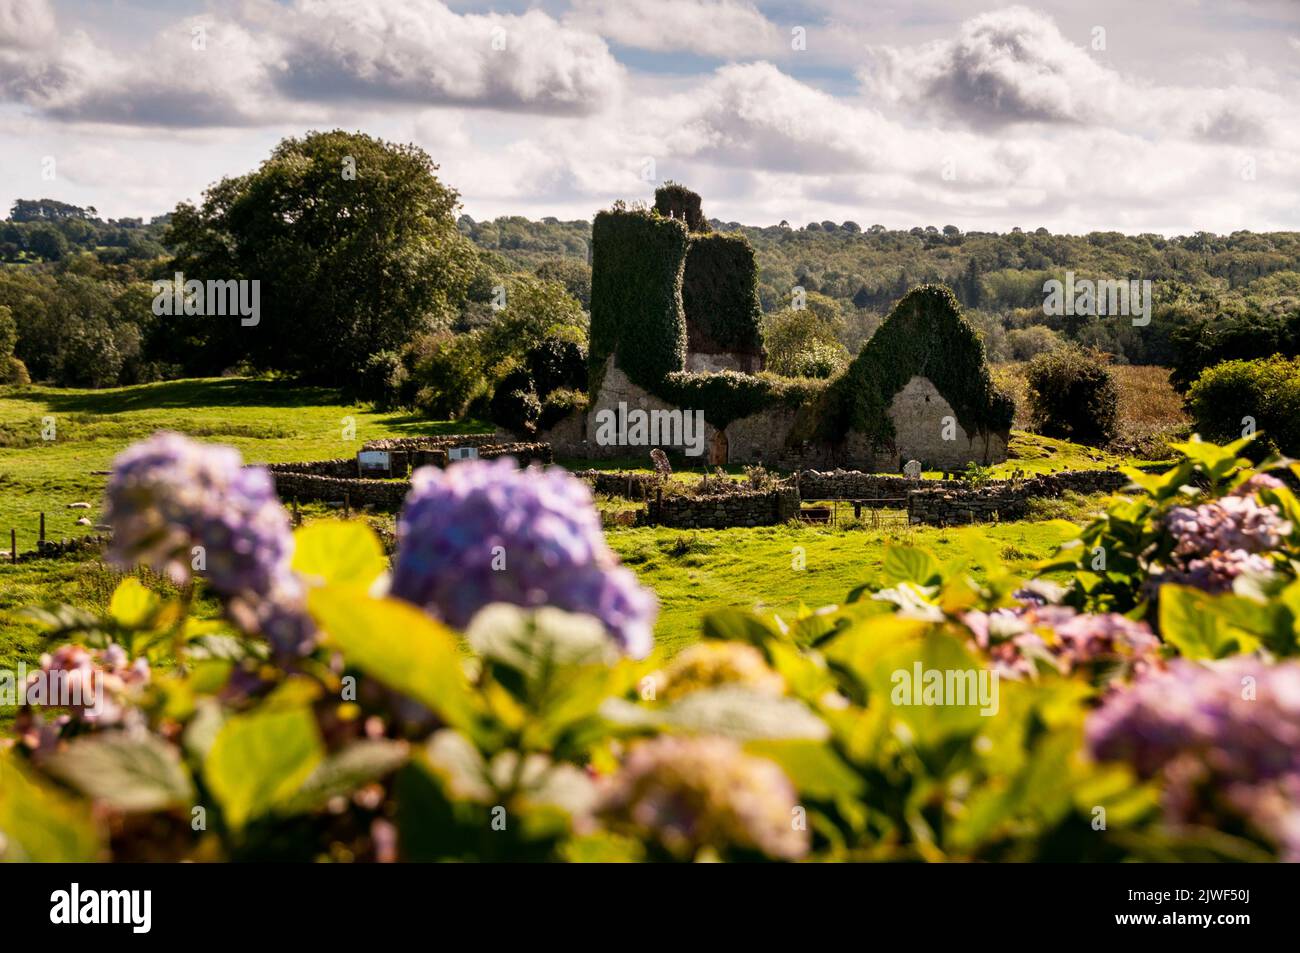 Ruins of Saint Nicholas Church in the12th Century lost medieval town of Newton Jerpoint, Ireland. Stock Photo